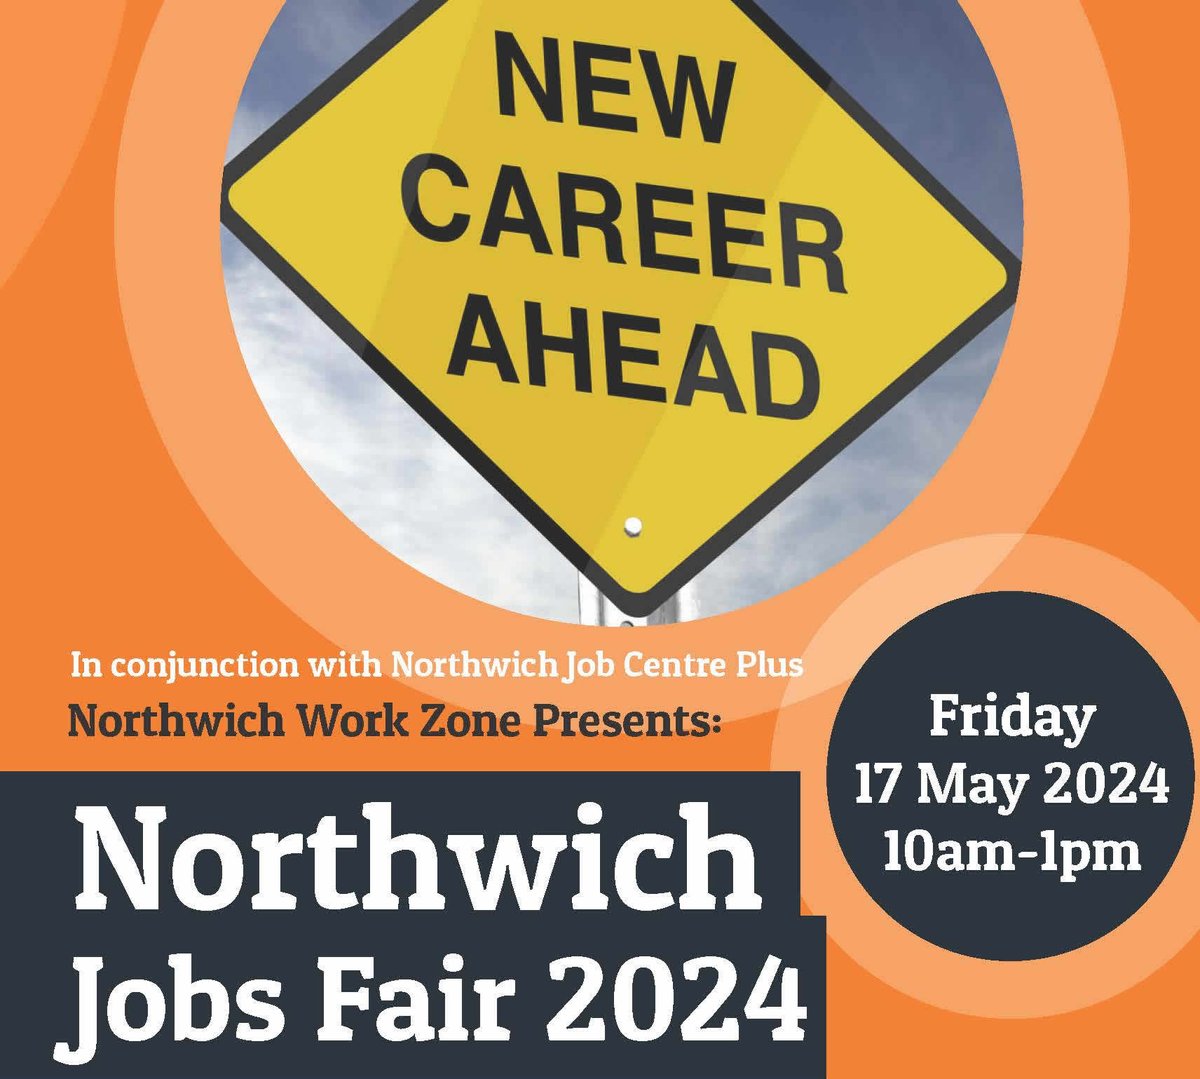 Looking for a new job? Come along to the Northwich Jobs Fair tomorrow (Friday, 17 May) 10am-1pm. There'll be a host of local and regional employers with vacancies on offer, 📍 Barons Quay, Leicester St, CW9 5LG For more information, contact Northwich Work Zone: 📱 07833 236675